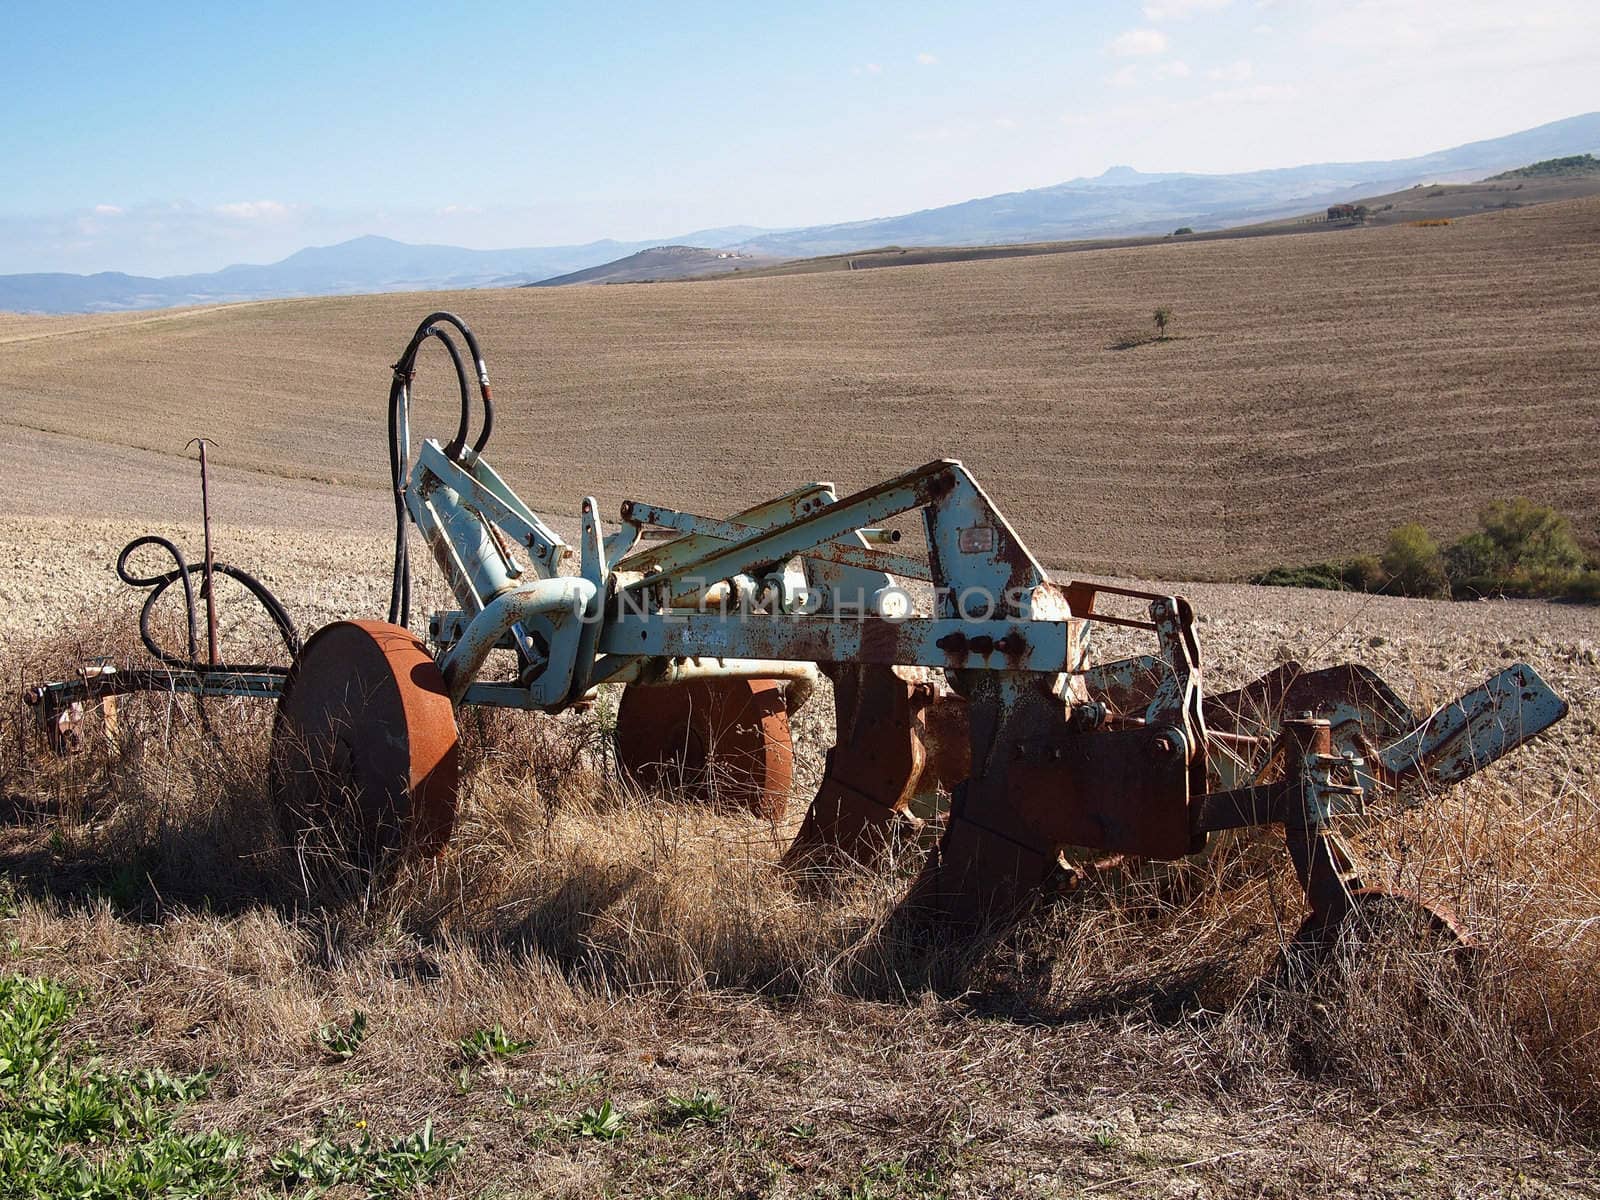 Old, rusty plough between the plowed hills of Tuscany, Italy.